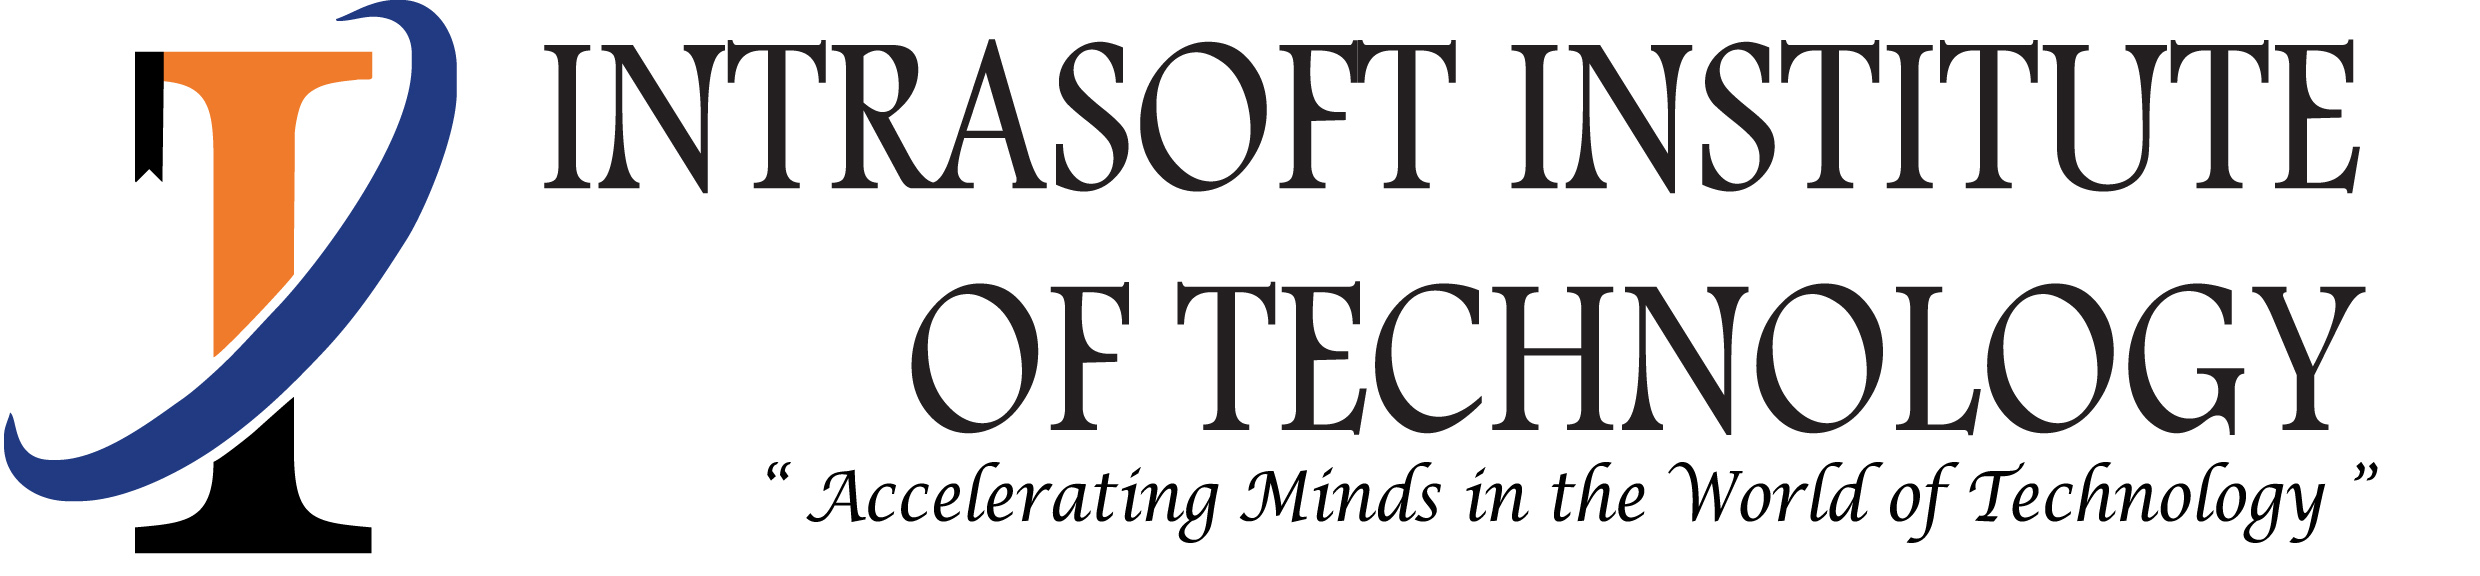 Intrasoft Institute of Technology